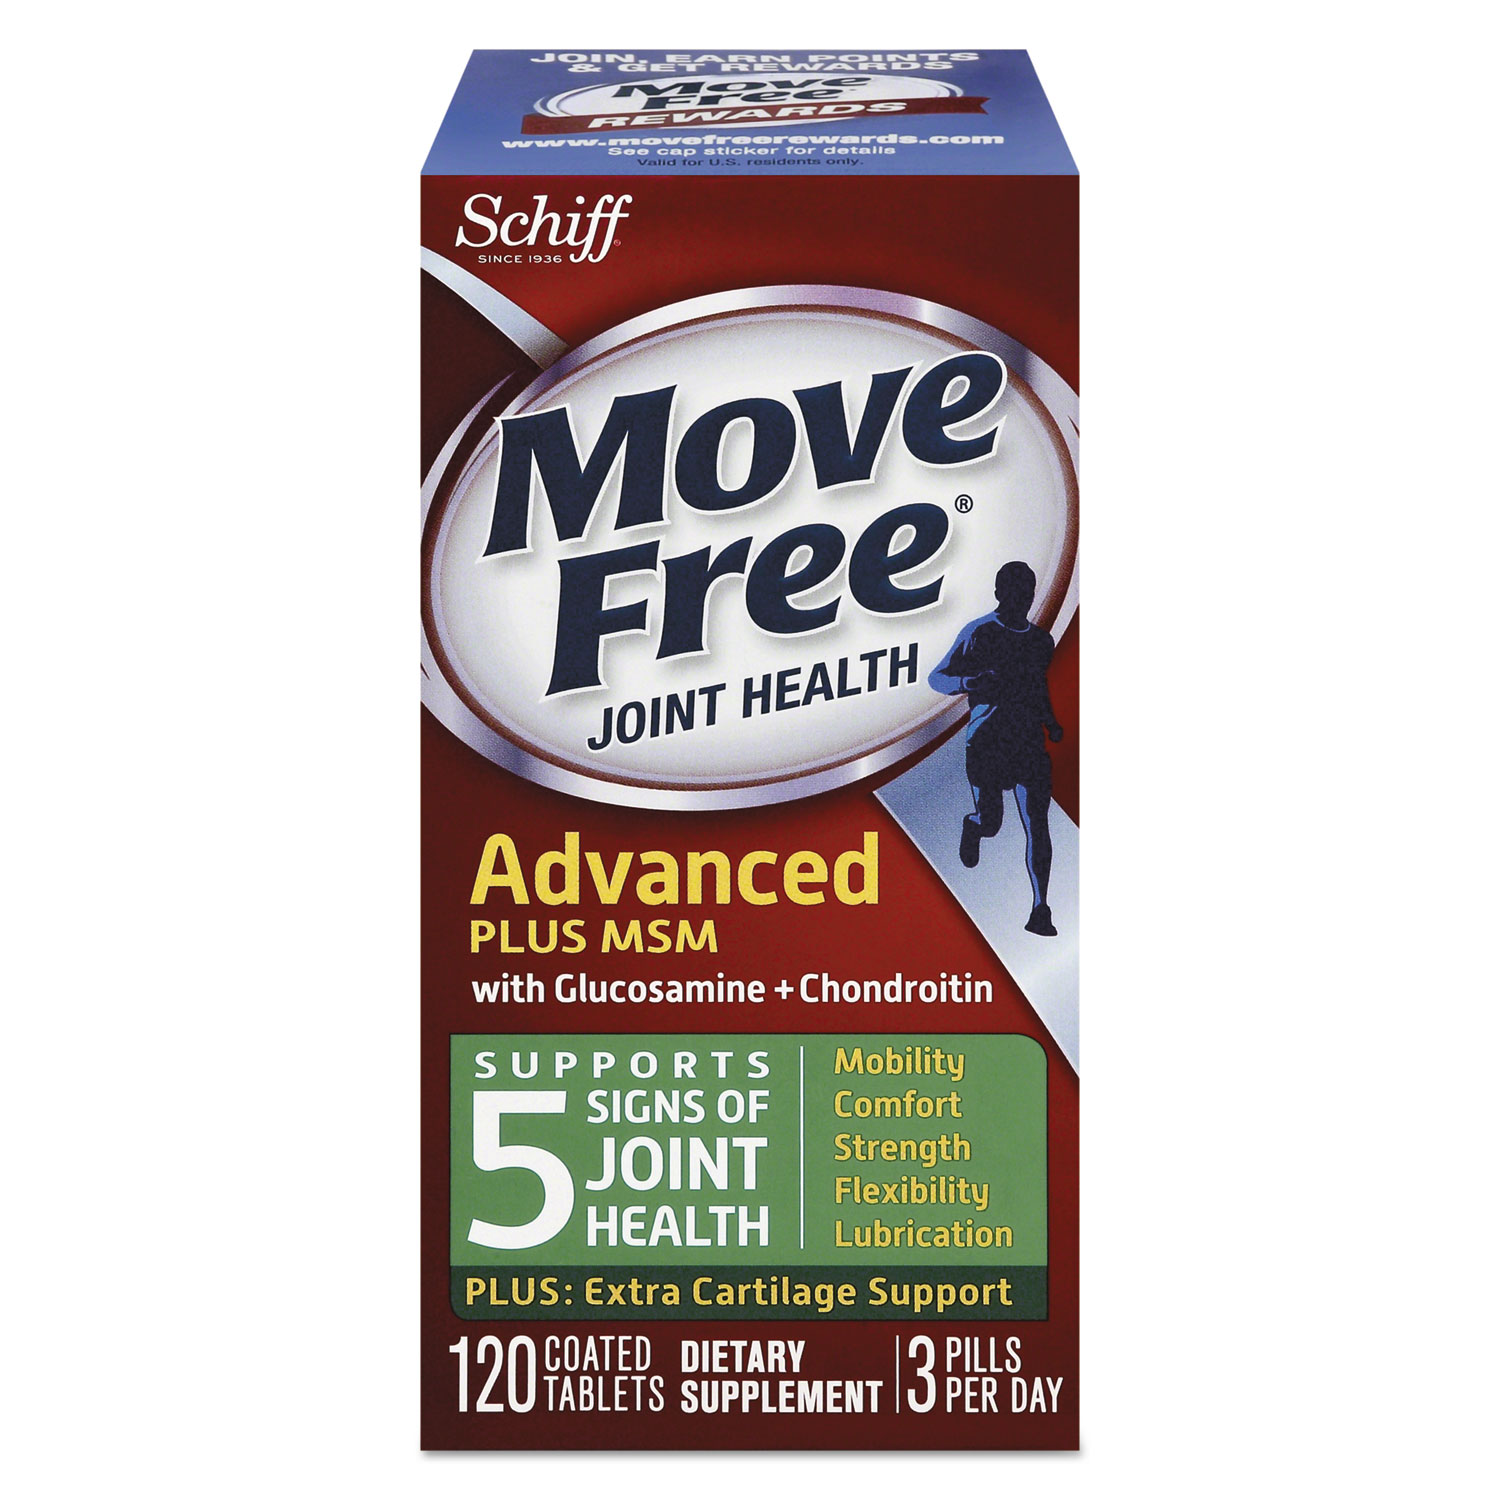  Move Free 20525-97008 Move Free Advanced Plus MSM Joint Health Tablet, 120 Count (MOV97008) 